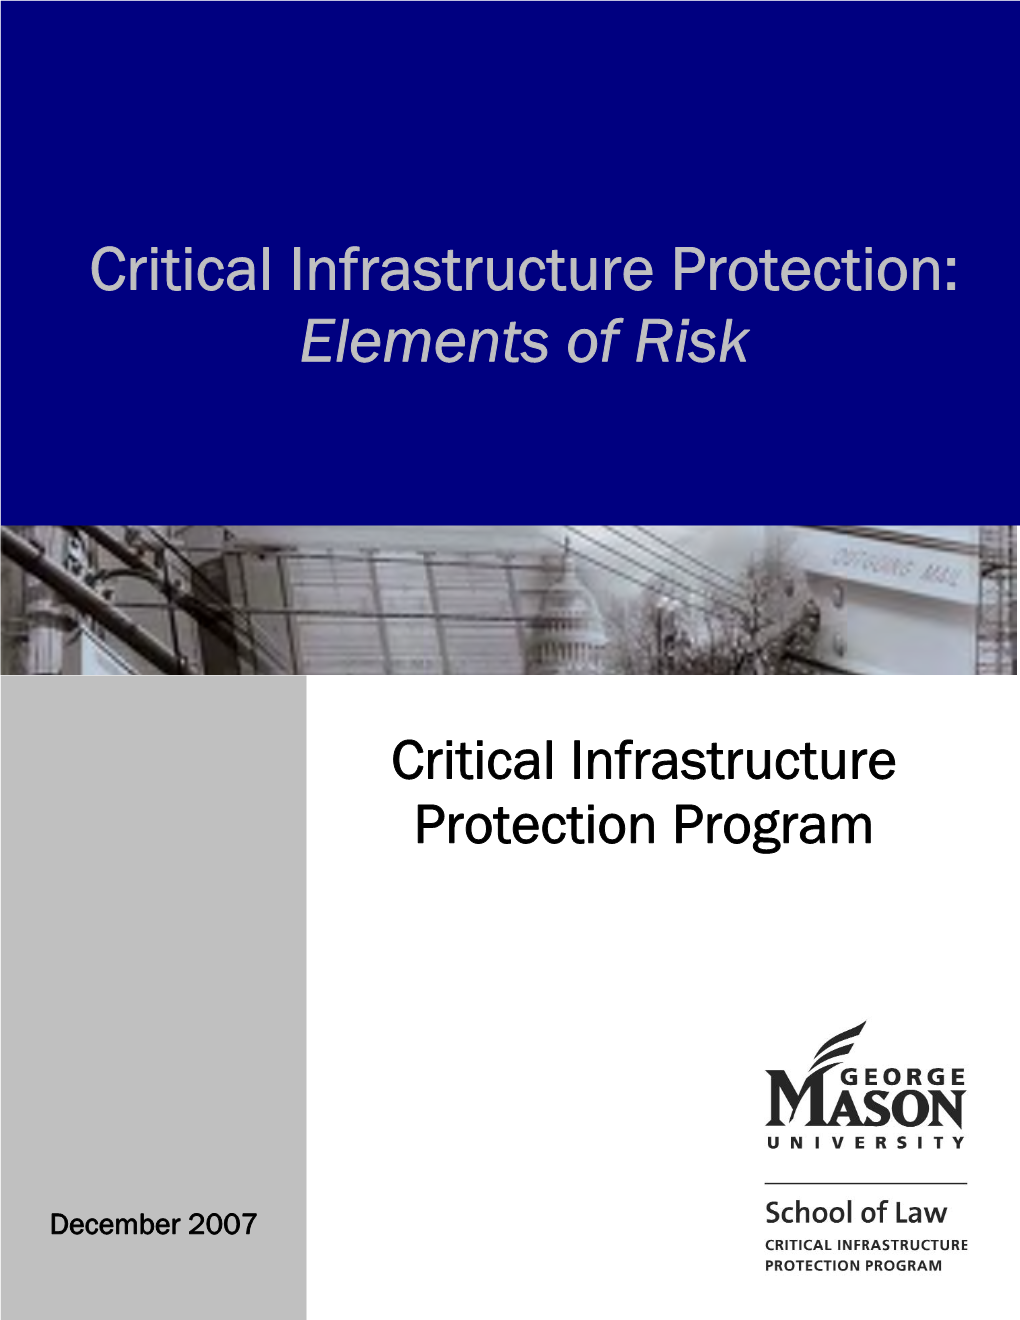 Critical Infrastructure Protection: Elements of Risk